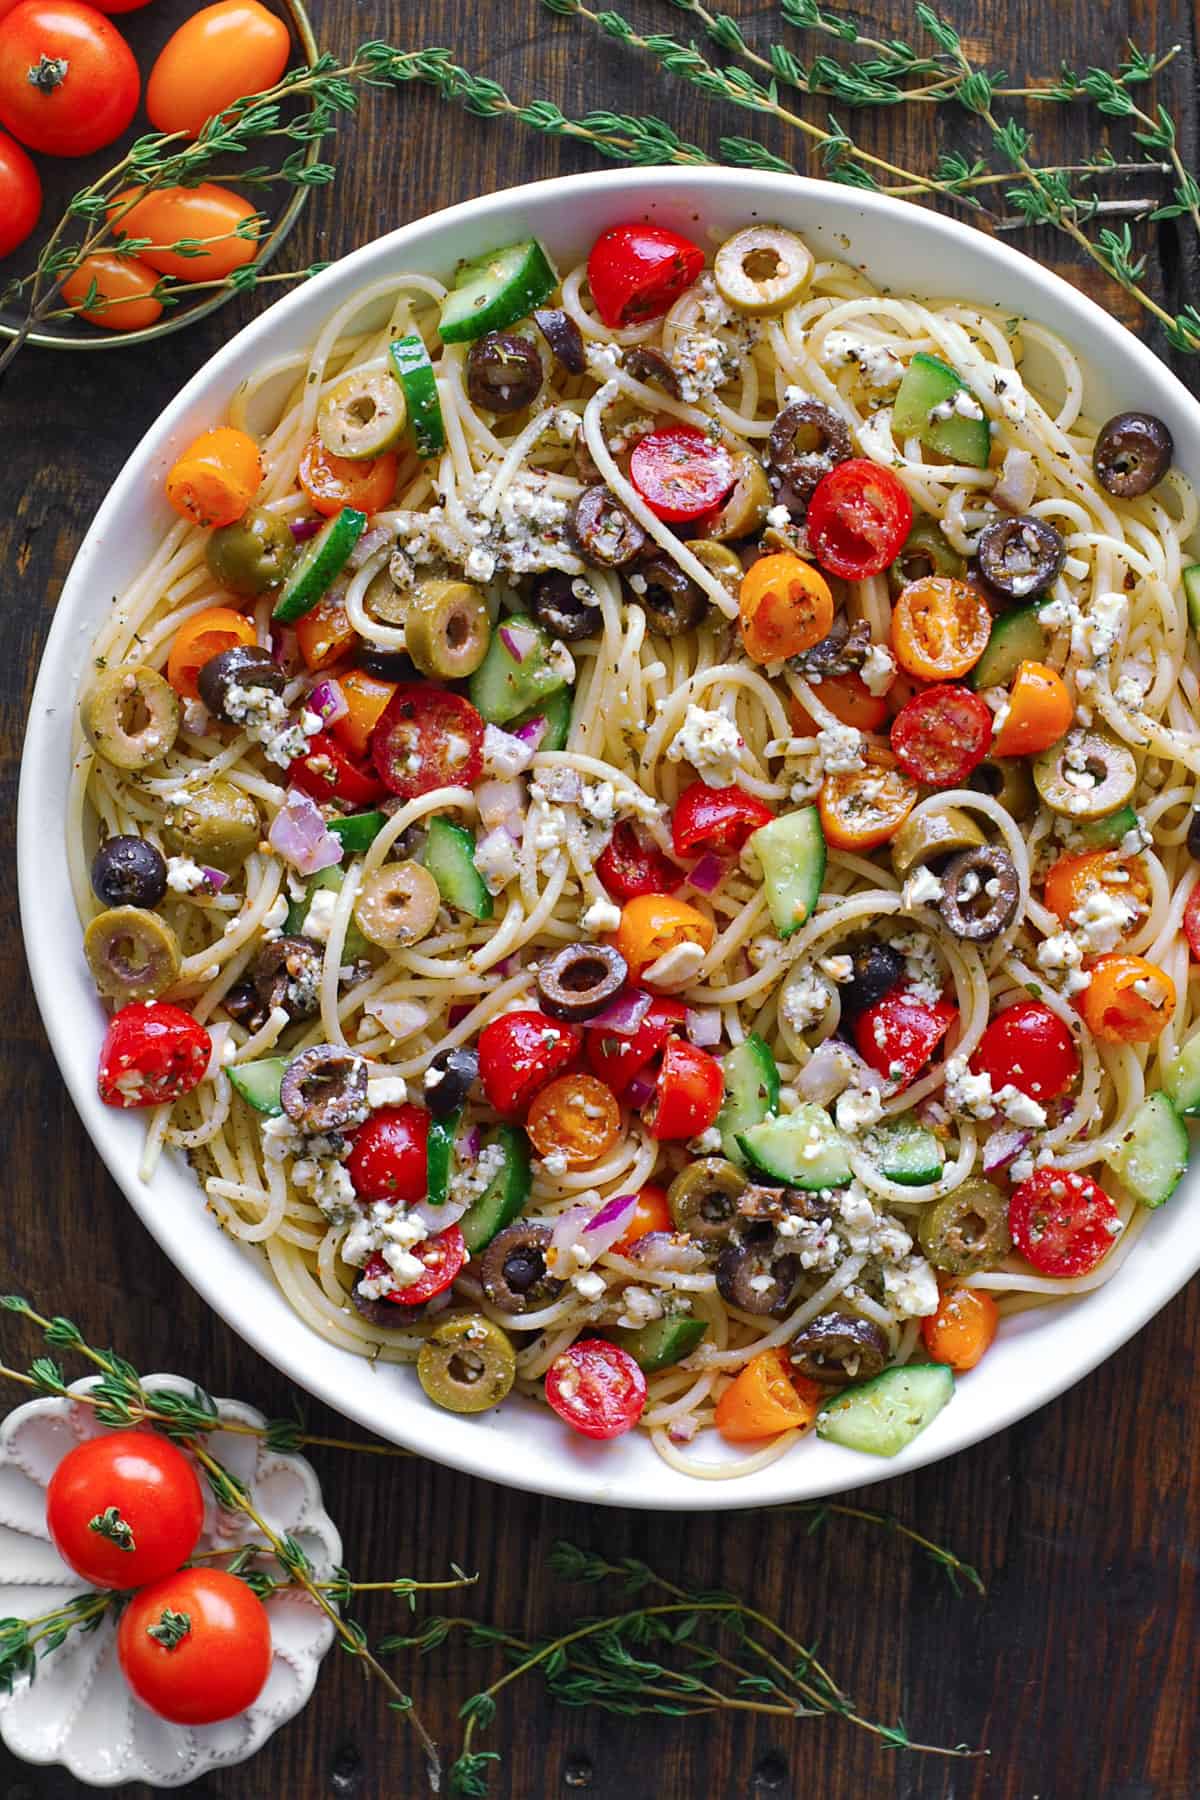 Spaghetti Salad with cherry (or grape) tomatoes, cucumbers, black olives, green olives, red onion, and feta cheese - in a white bowl.